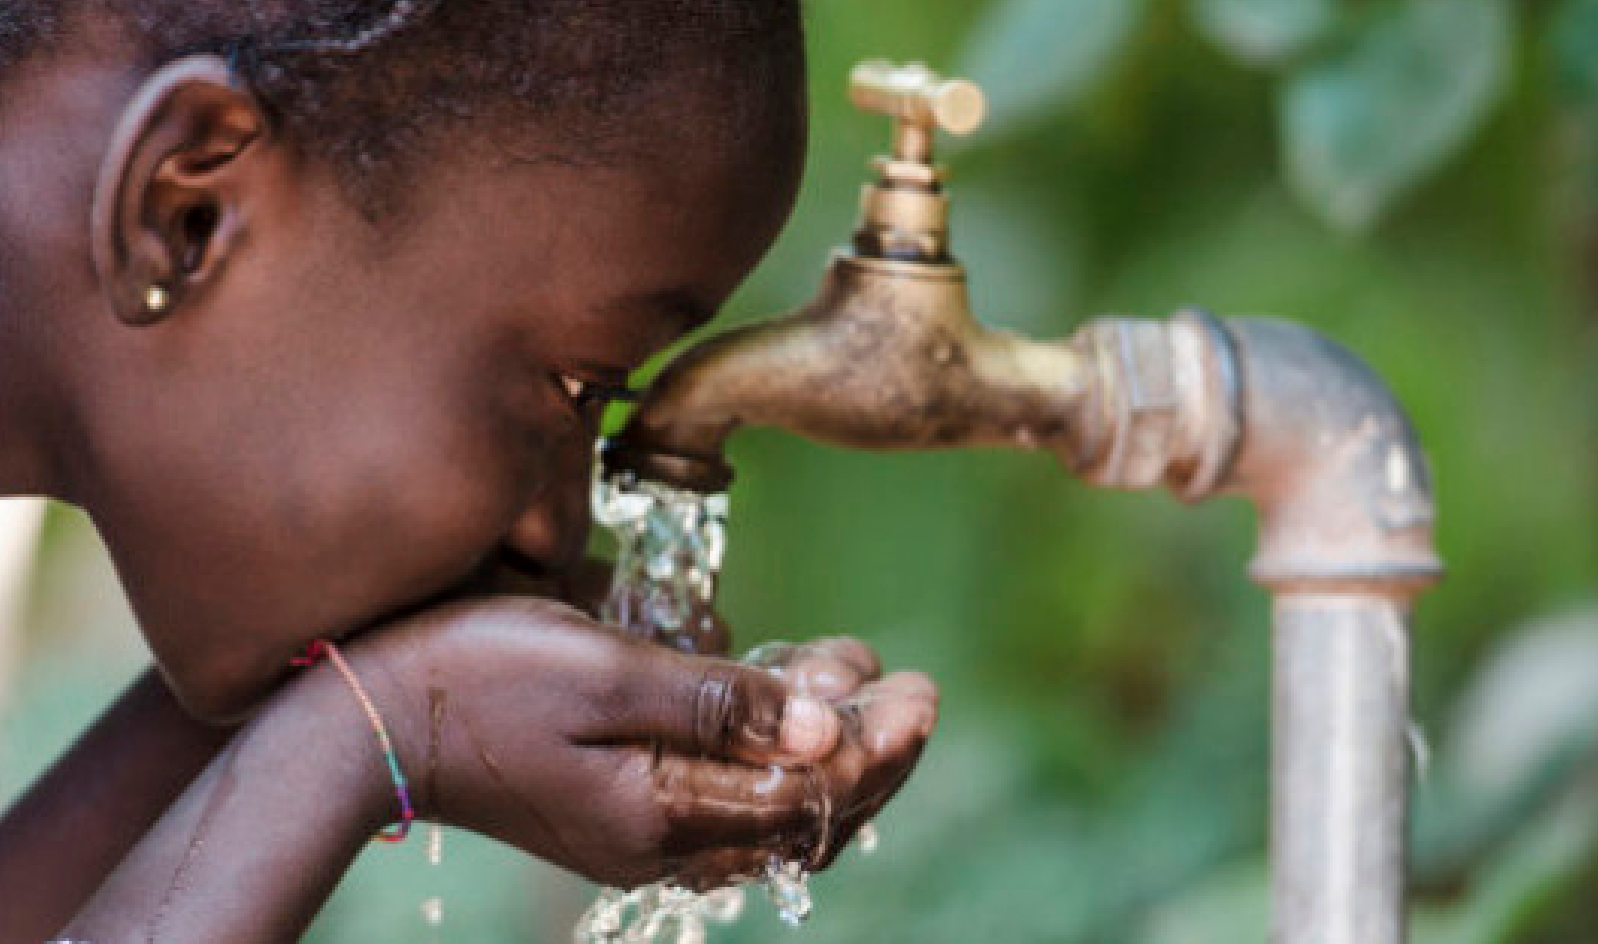 25 Billion Spent But No Water: An Information Request Brings Clean Water to Communities